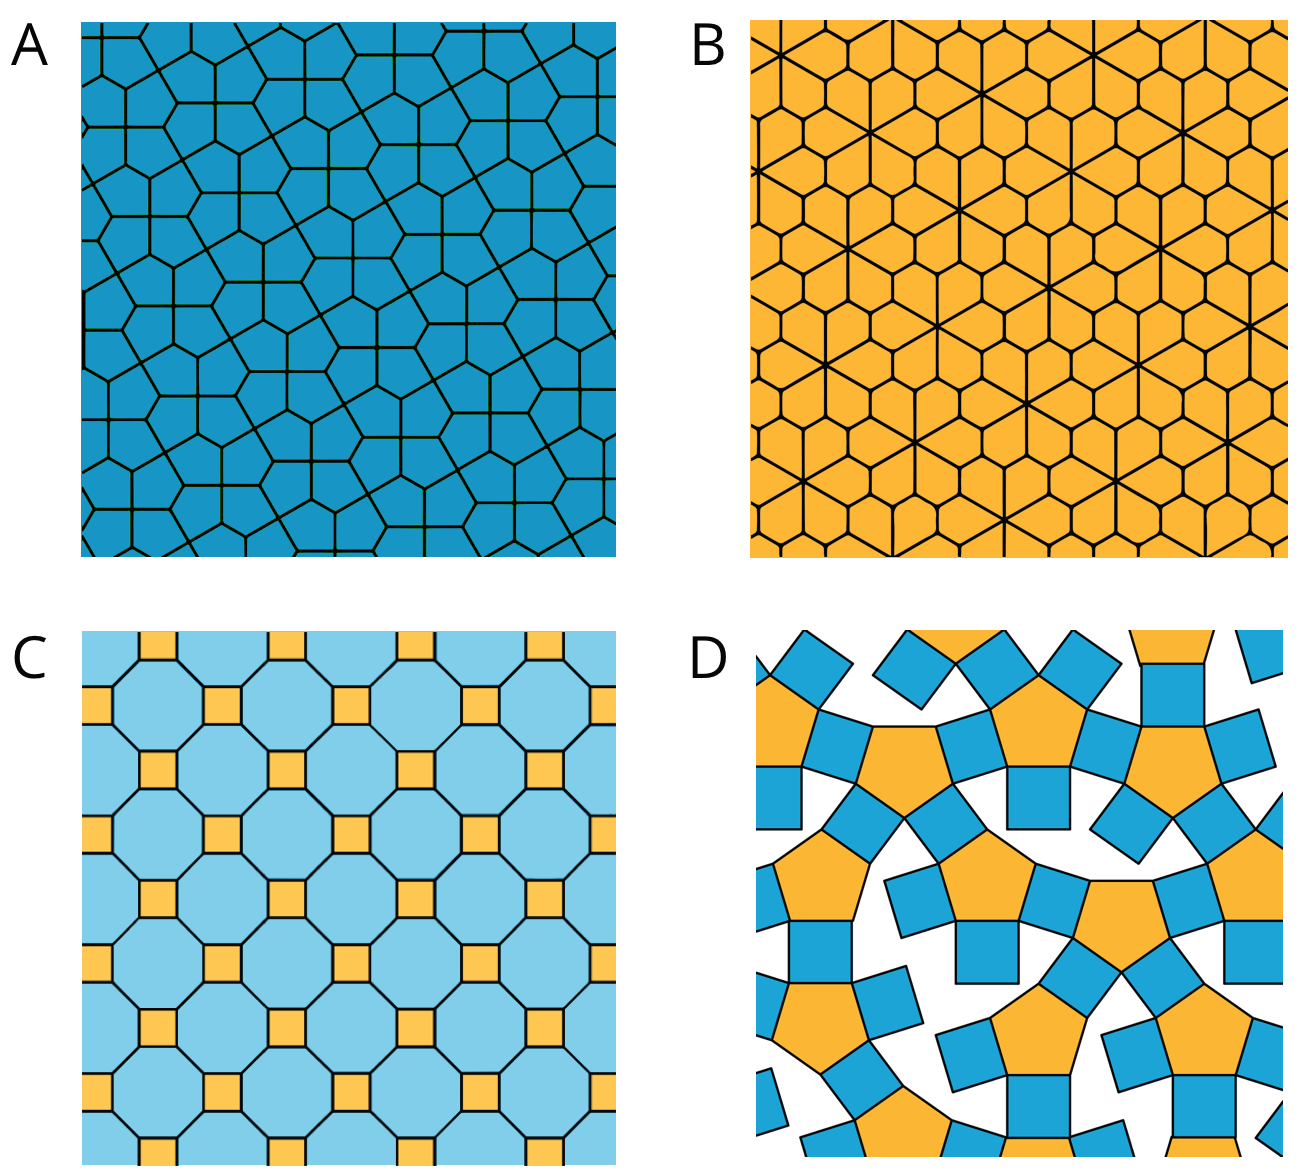 Four patterns of tiles labeled A, B, C, and D. Pattern A is all blue tiles, patter B is all yellow tiles, pattern C is a combination of blue and yellow tiles, and pattern D is a combination of blue tiles, yellow tiles, and blank spaces.